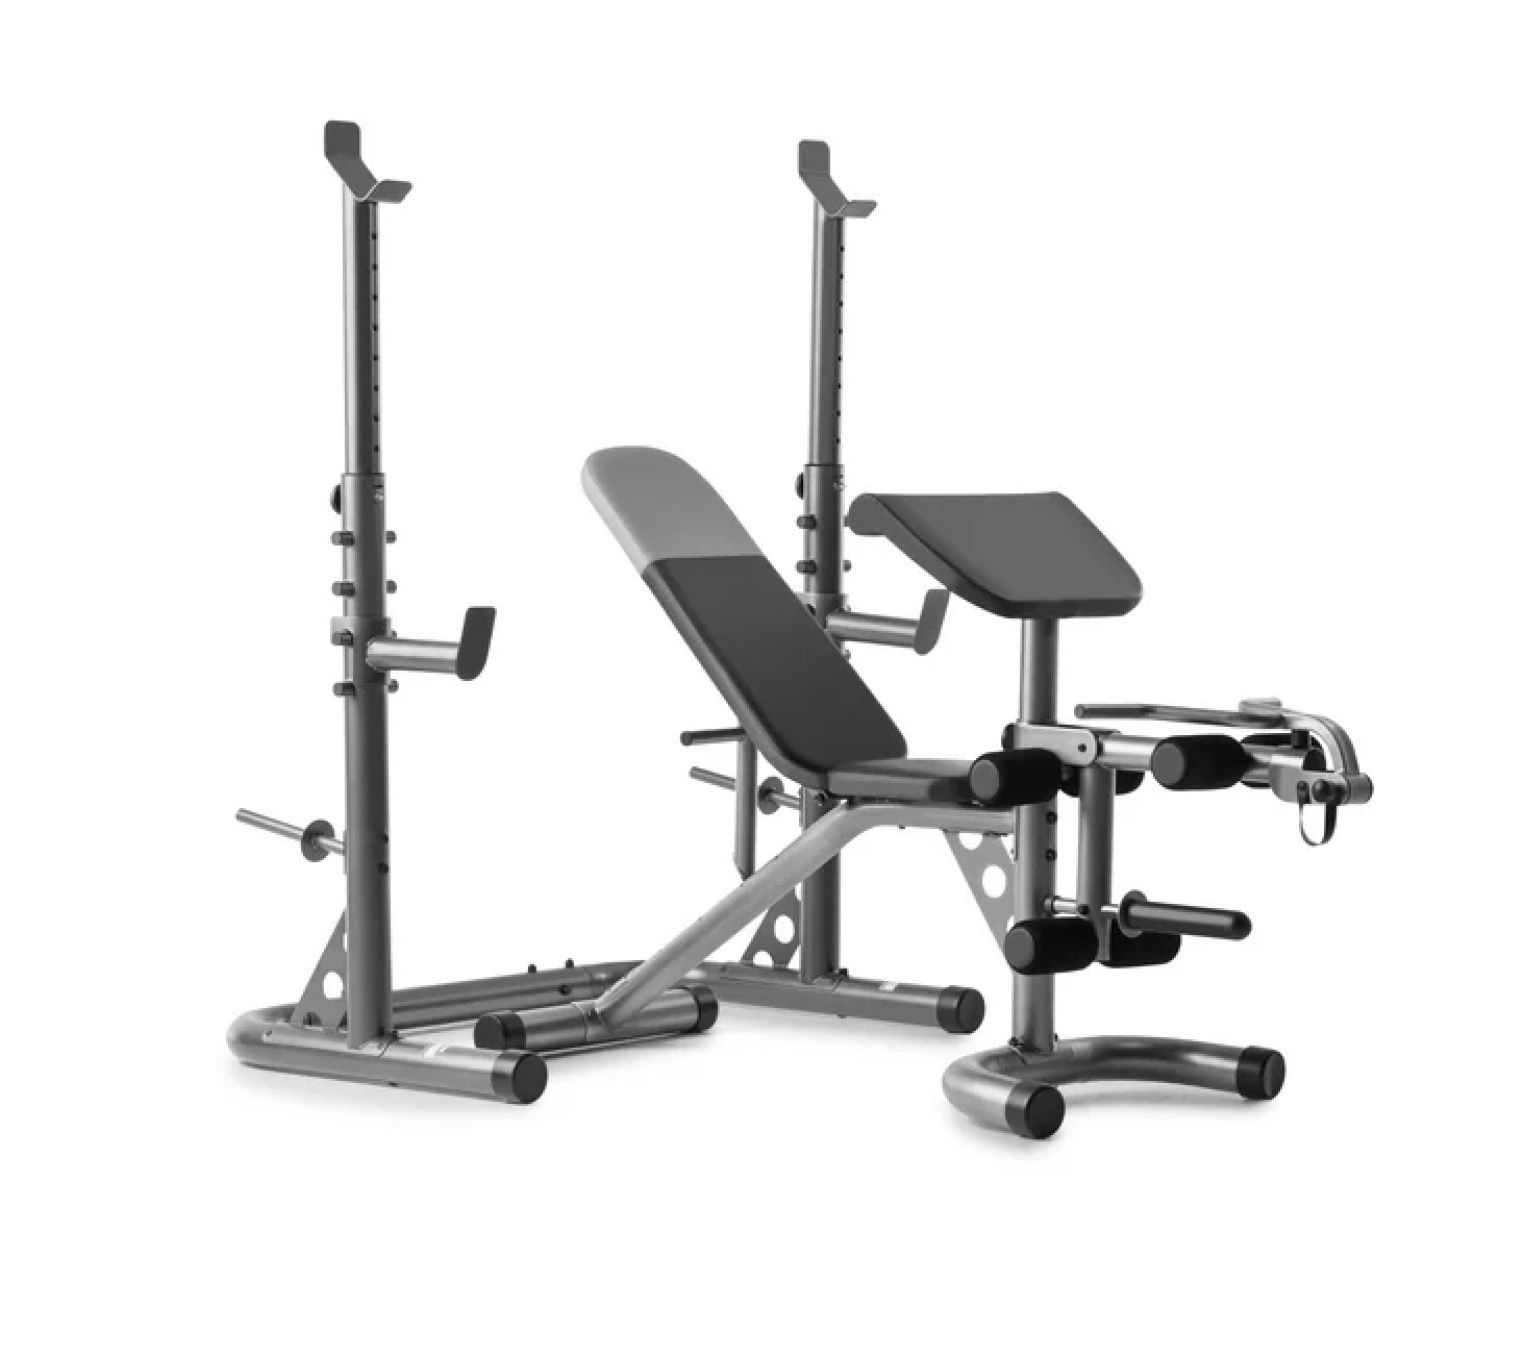 Weider XRS 20 Adjustable Bench with Olympic Squat Rack and Preacher Pad, 610 lb. Weight Limit